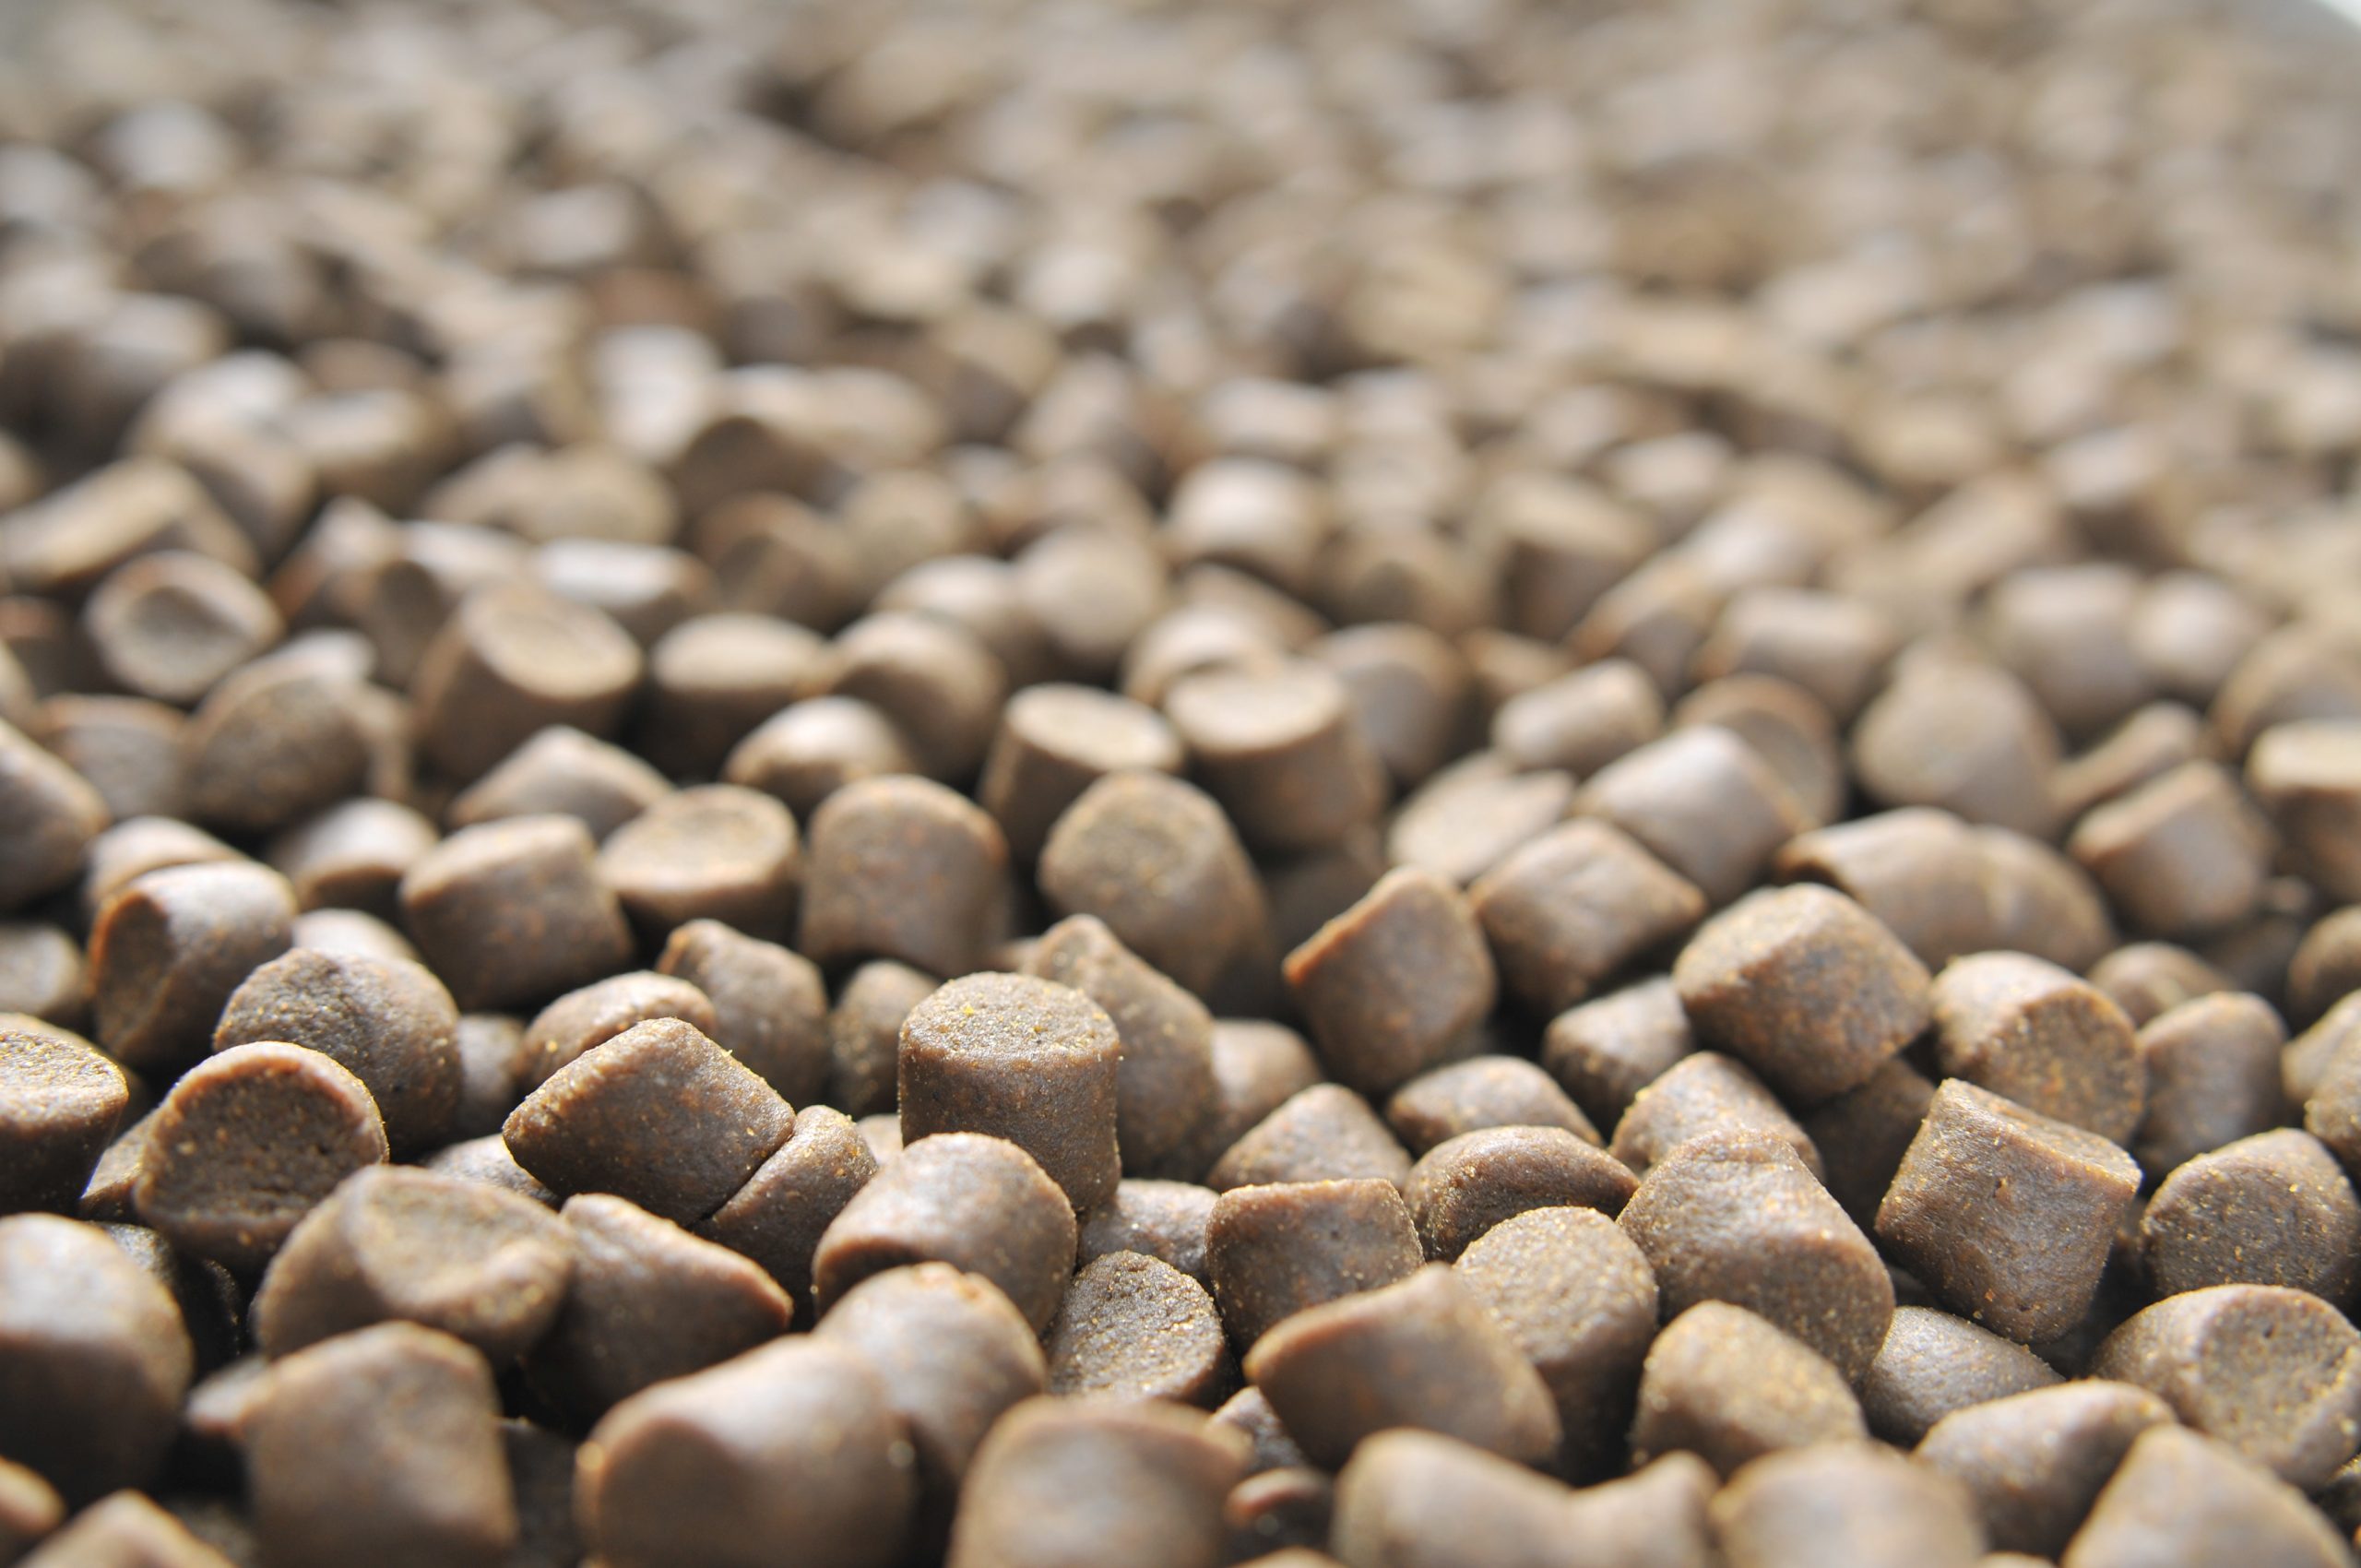 Skretting wants to grow its fish meal free concept. Photo: Shutterstock